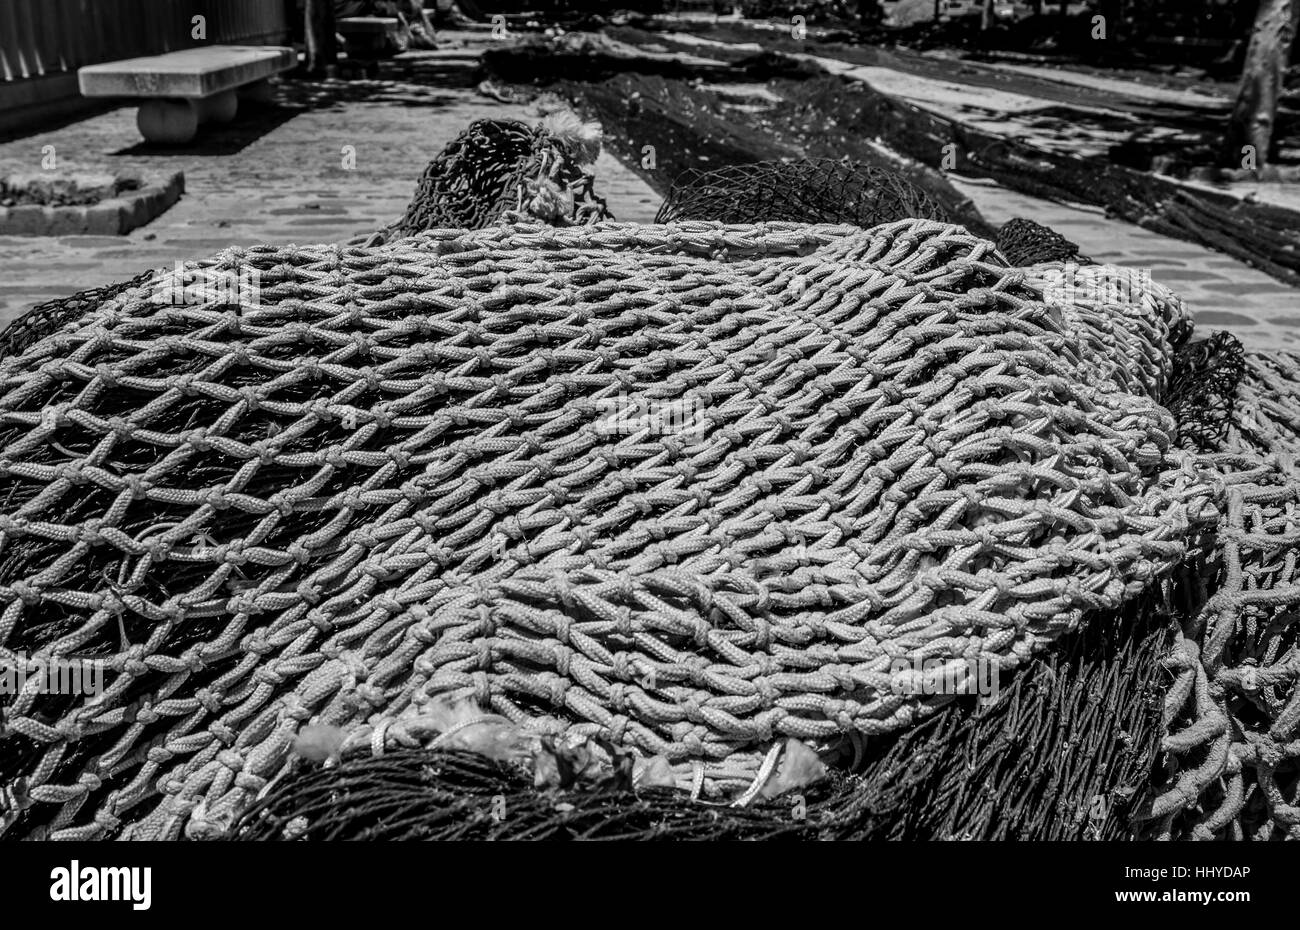 large fishing nets drying on stone path with knots Stock Photo